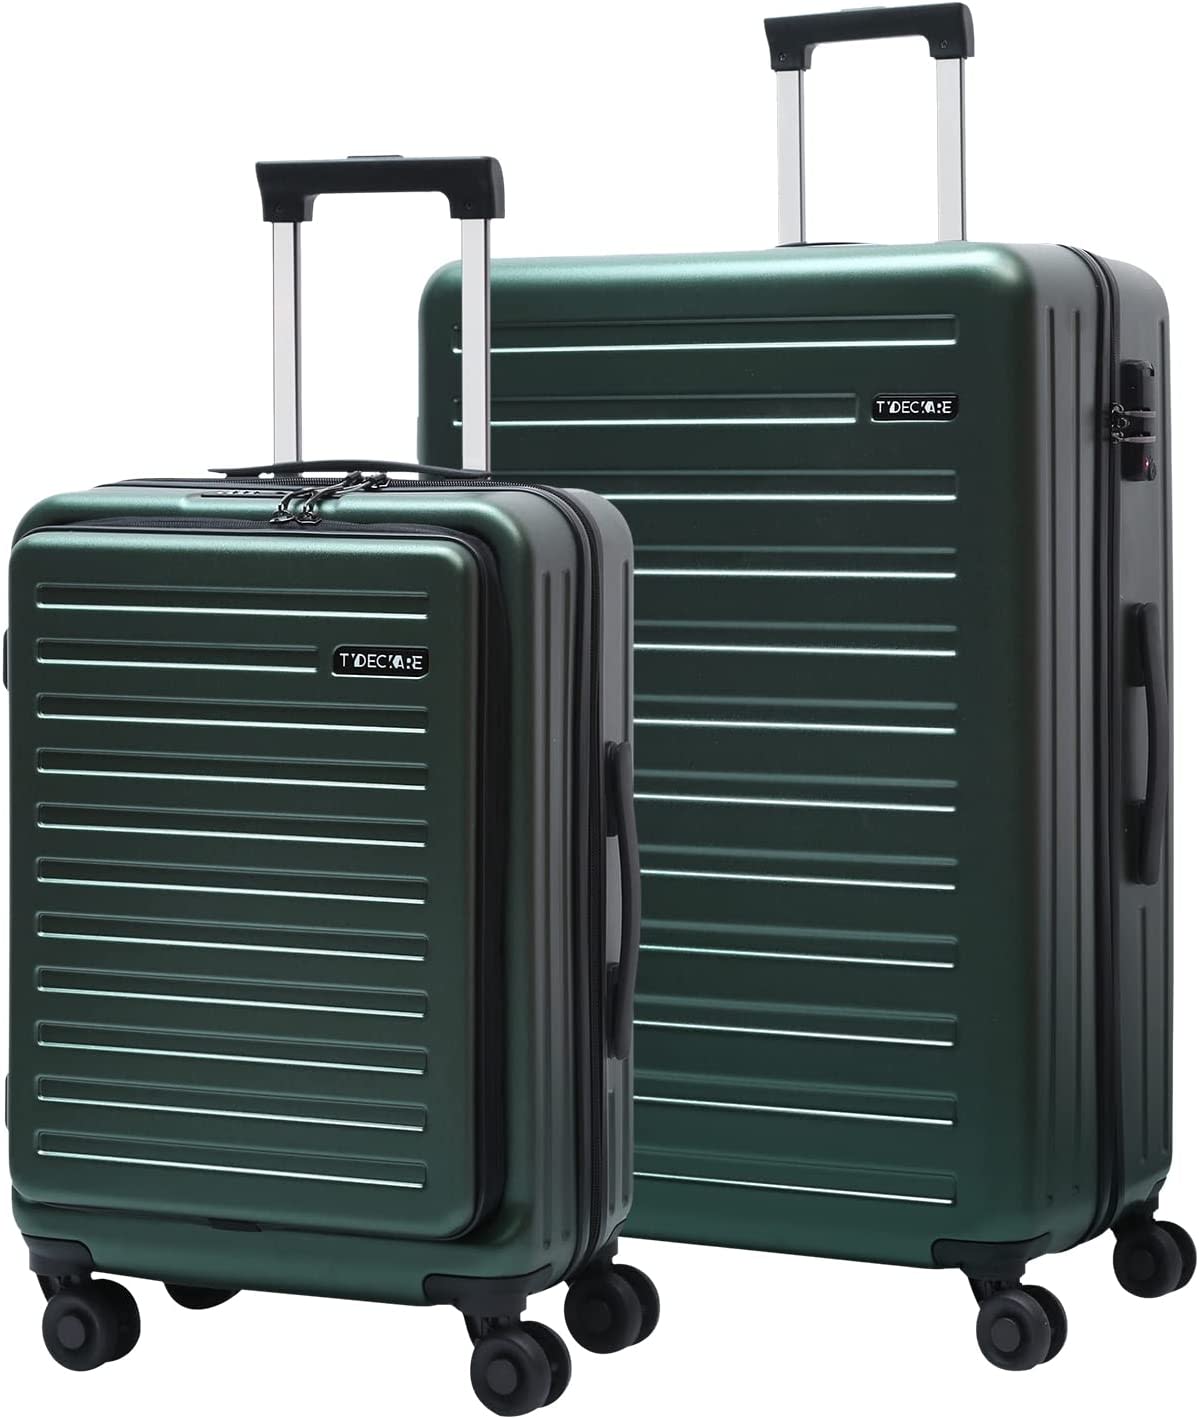 Best TydeCkare Carry on Luggage Price & Reviews in Australia 2023